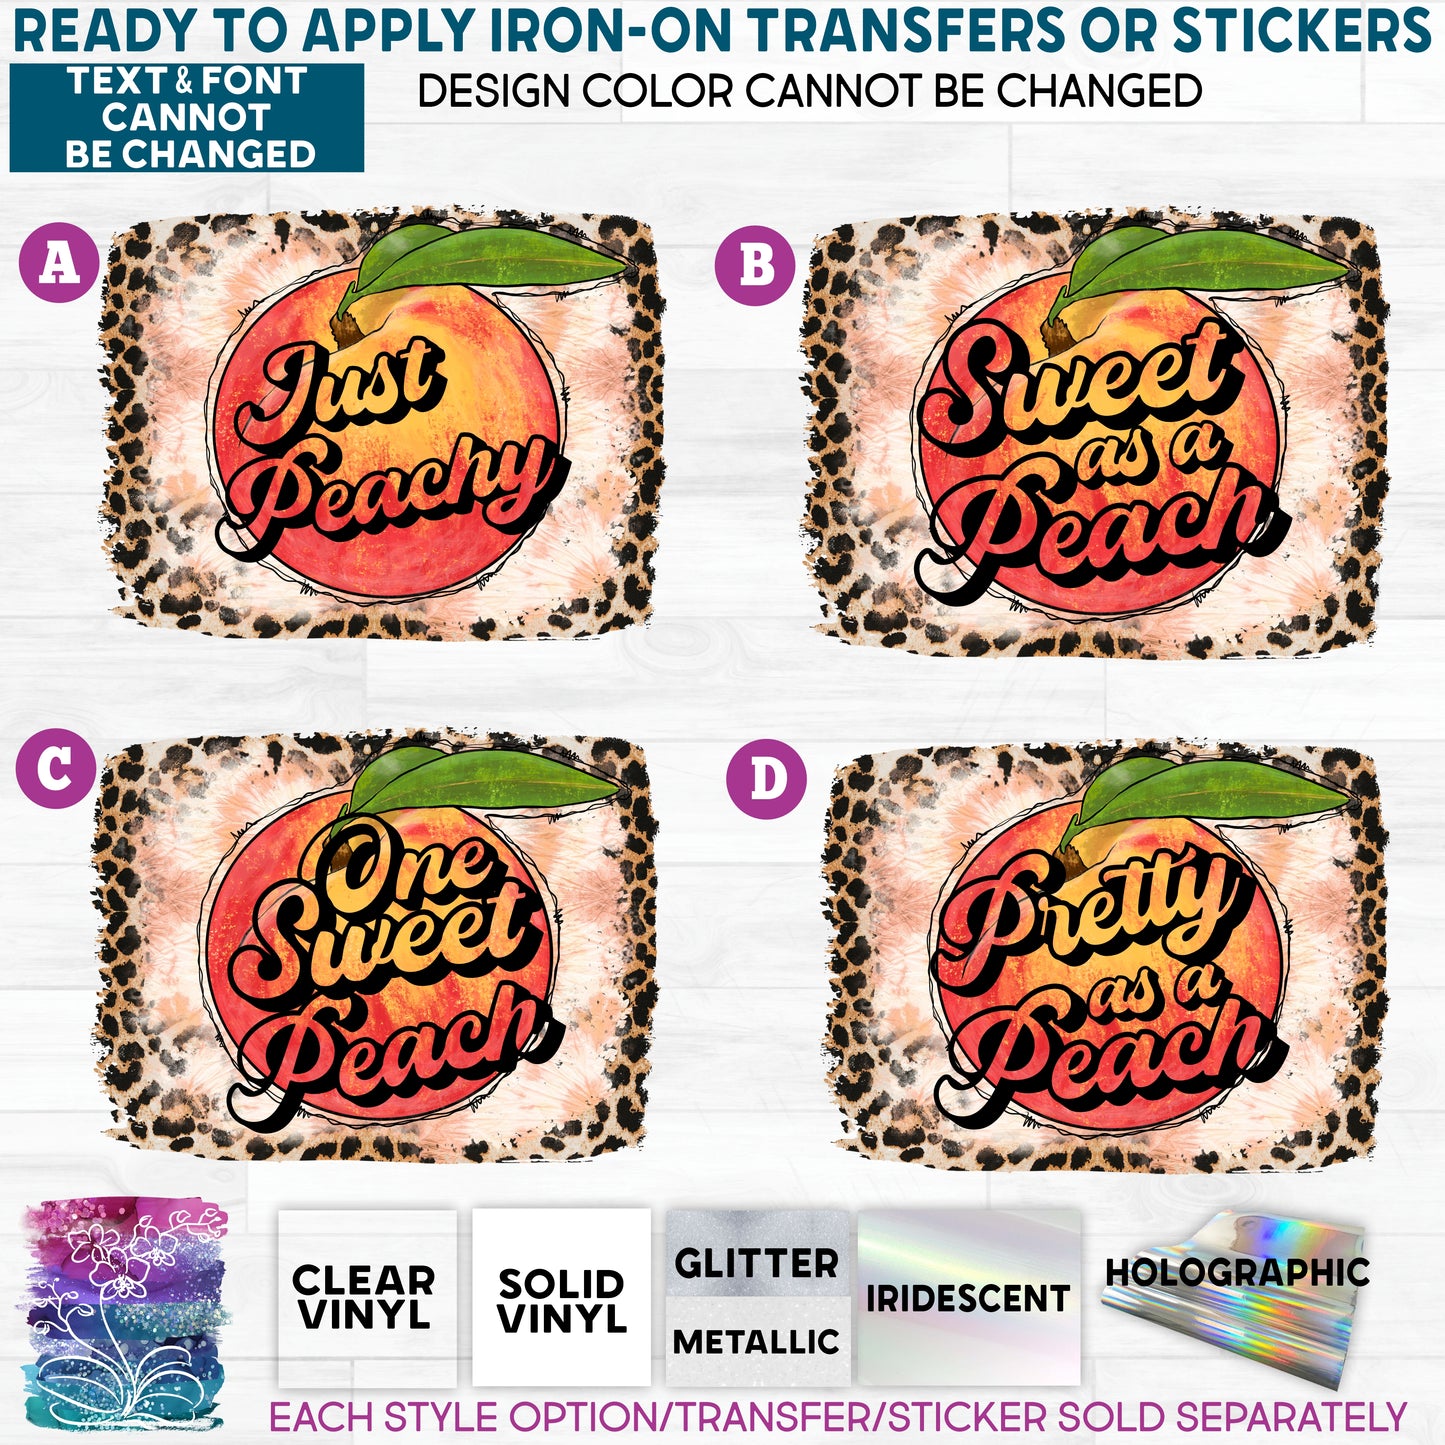 (s415-5) Watercolor Leopard Just Peachy, Sweet as a Peach Glitter or Vinyl Iron-On Transfer or Sticker